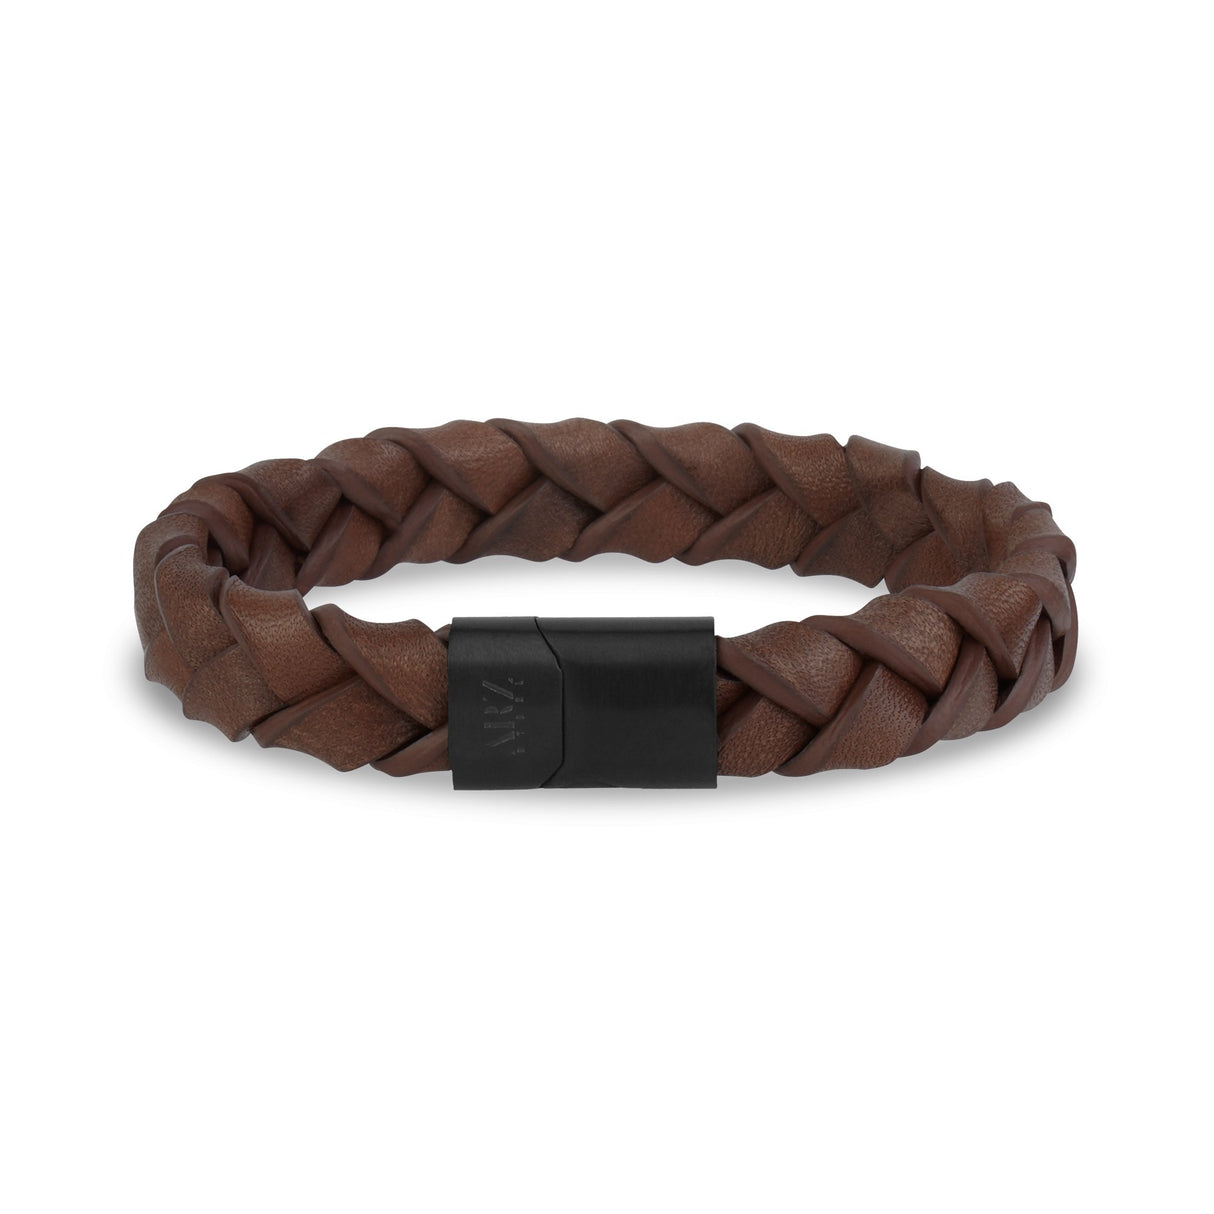 Heren Steel Leather Armbanden - 11mm Woven Brown Leather Steel Clasp Engravable Armband